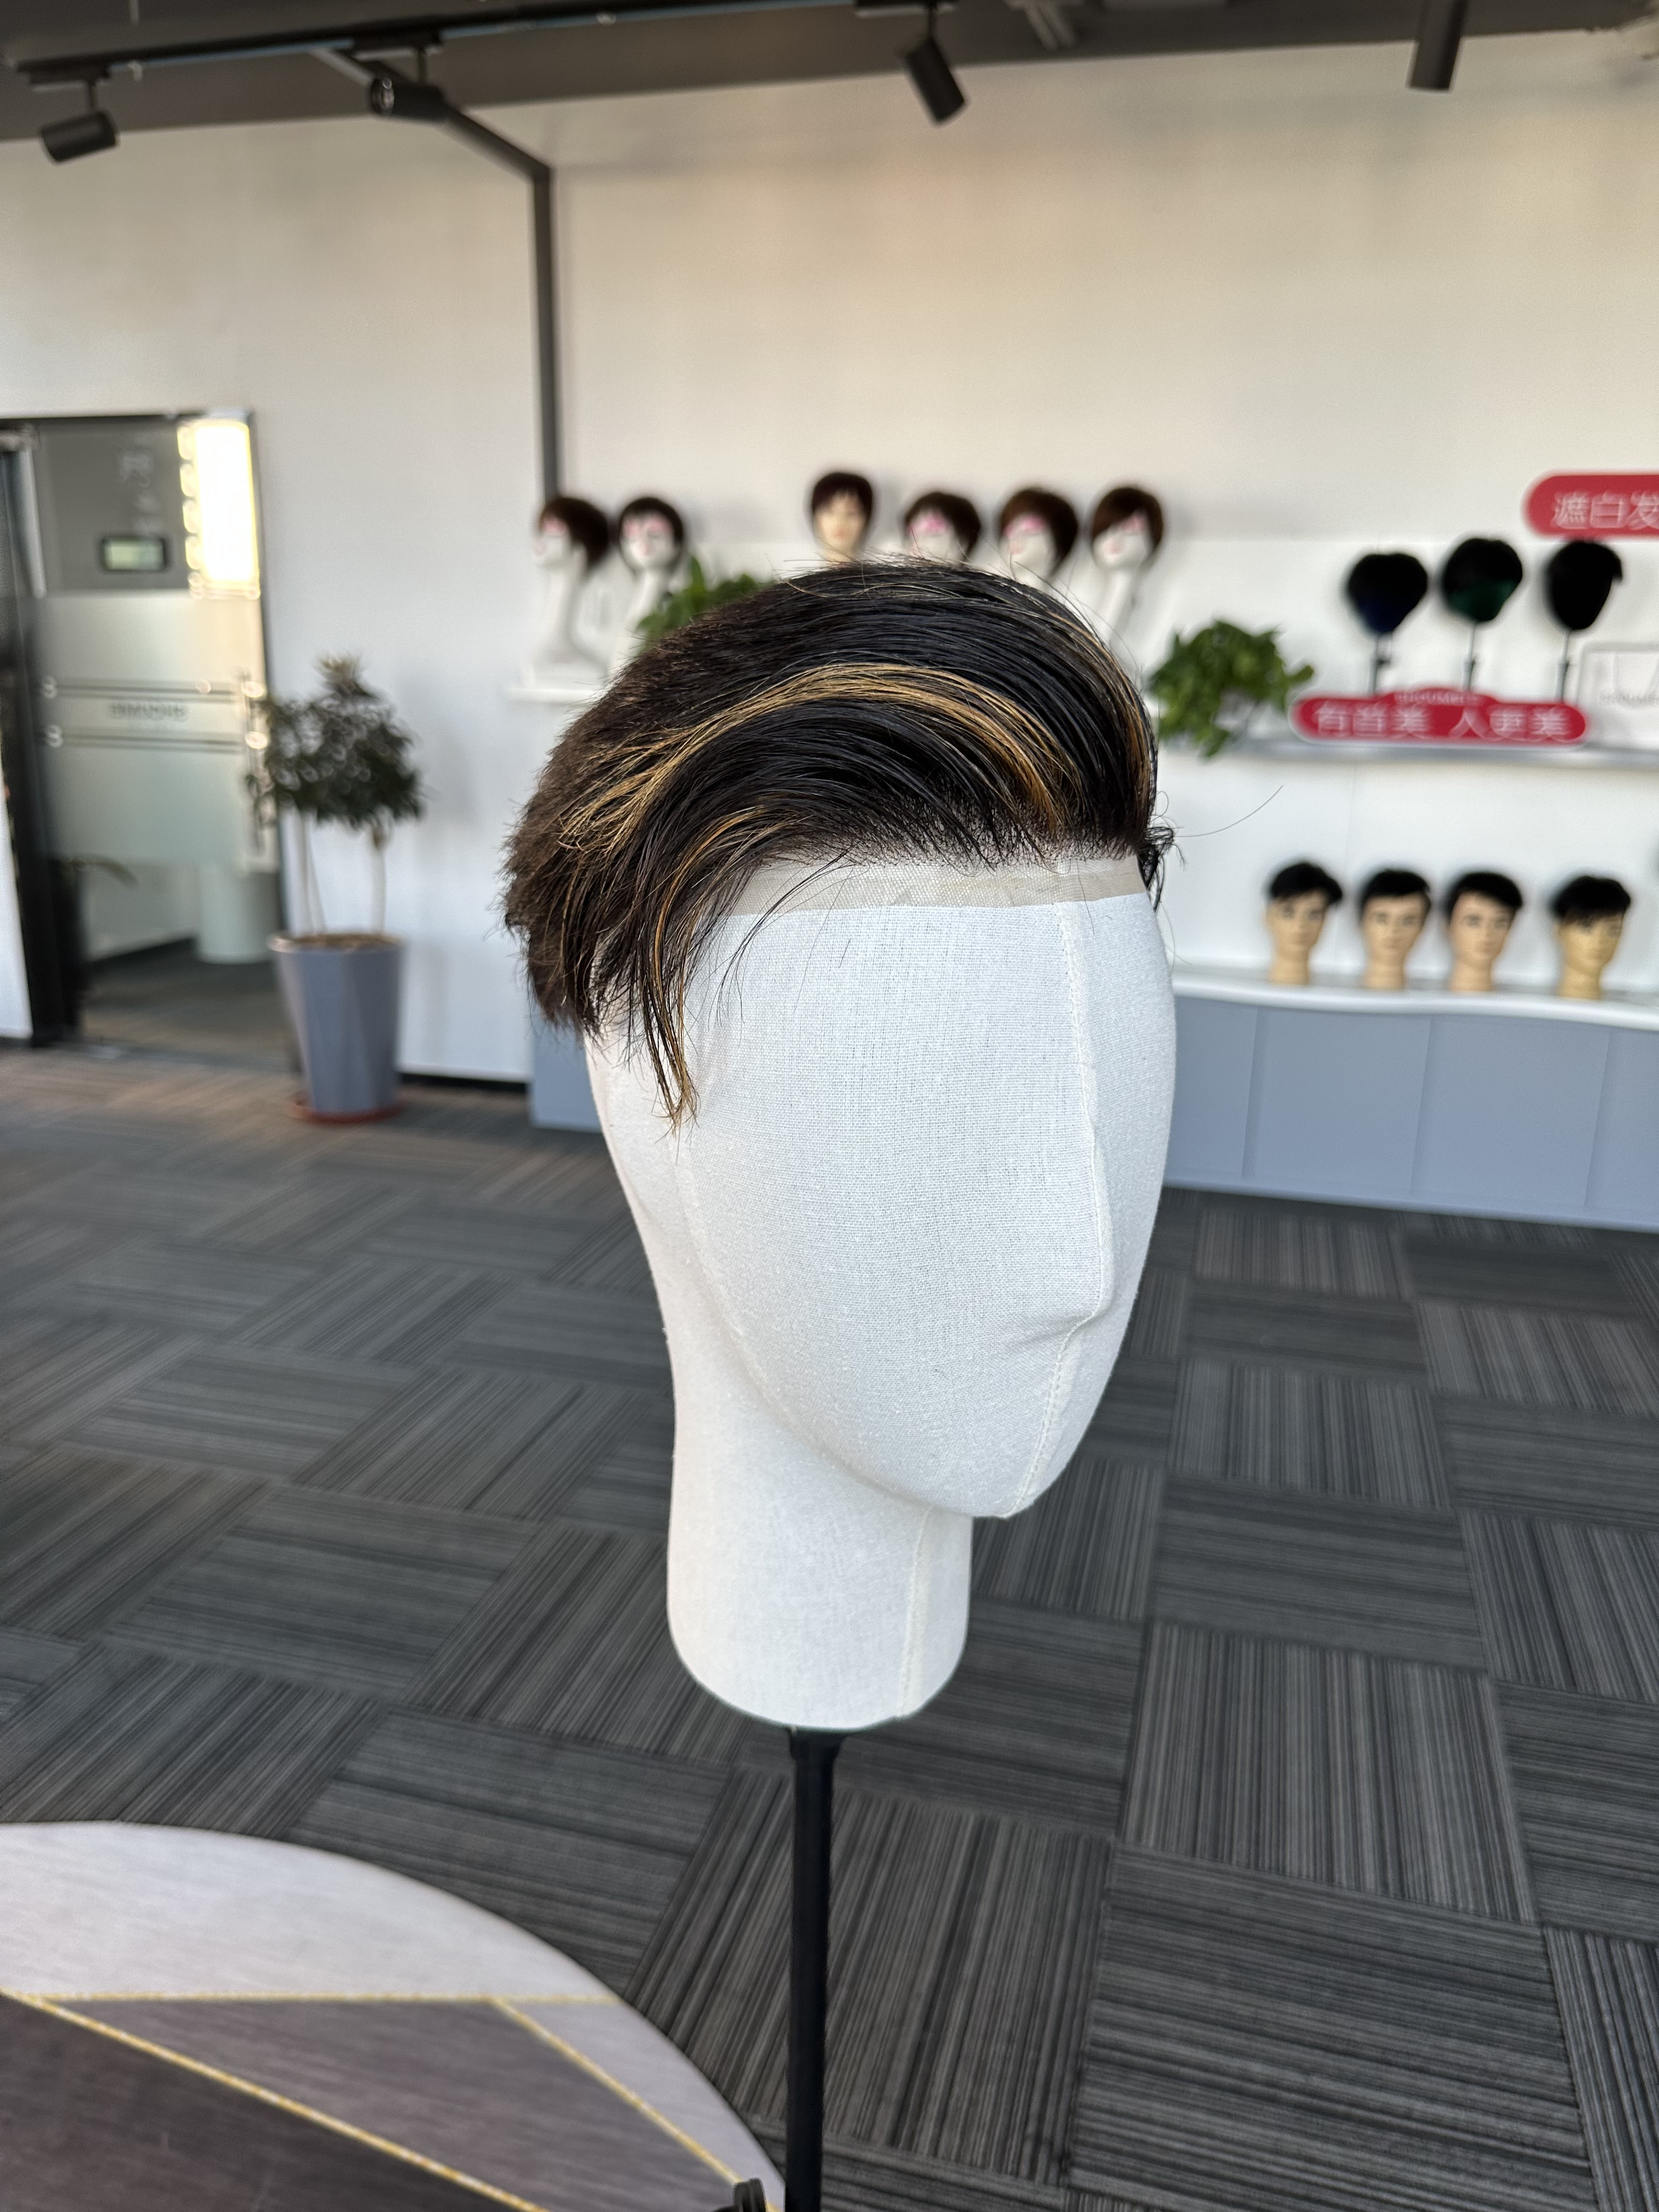 Wear To Go Highlight Swiss Full Lace Hair Systems With Layered Haircuts For Men Replacement Toupee Hairpiece With Fashion Hairstyle For Thinning Hair Wholesale